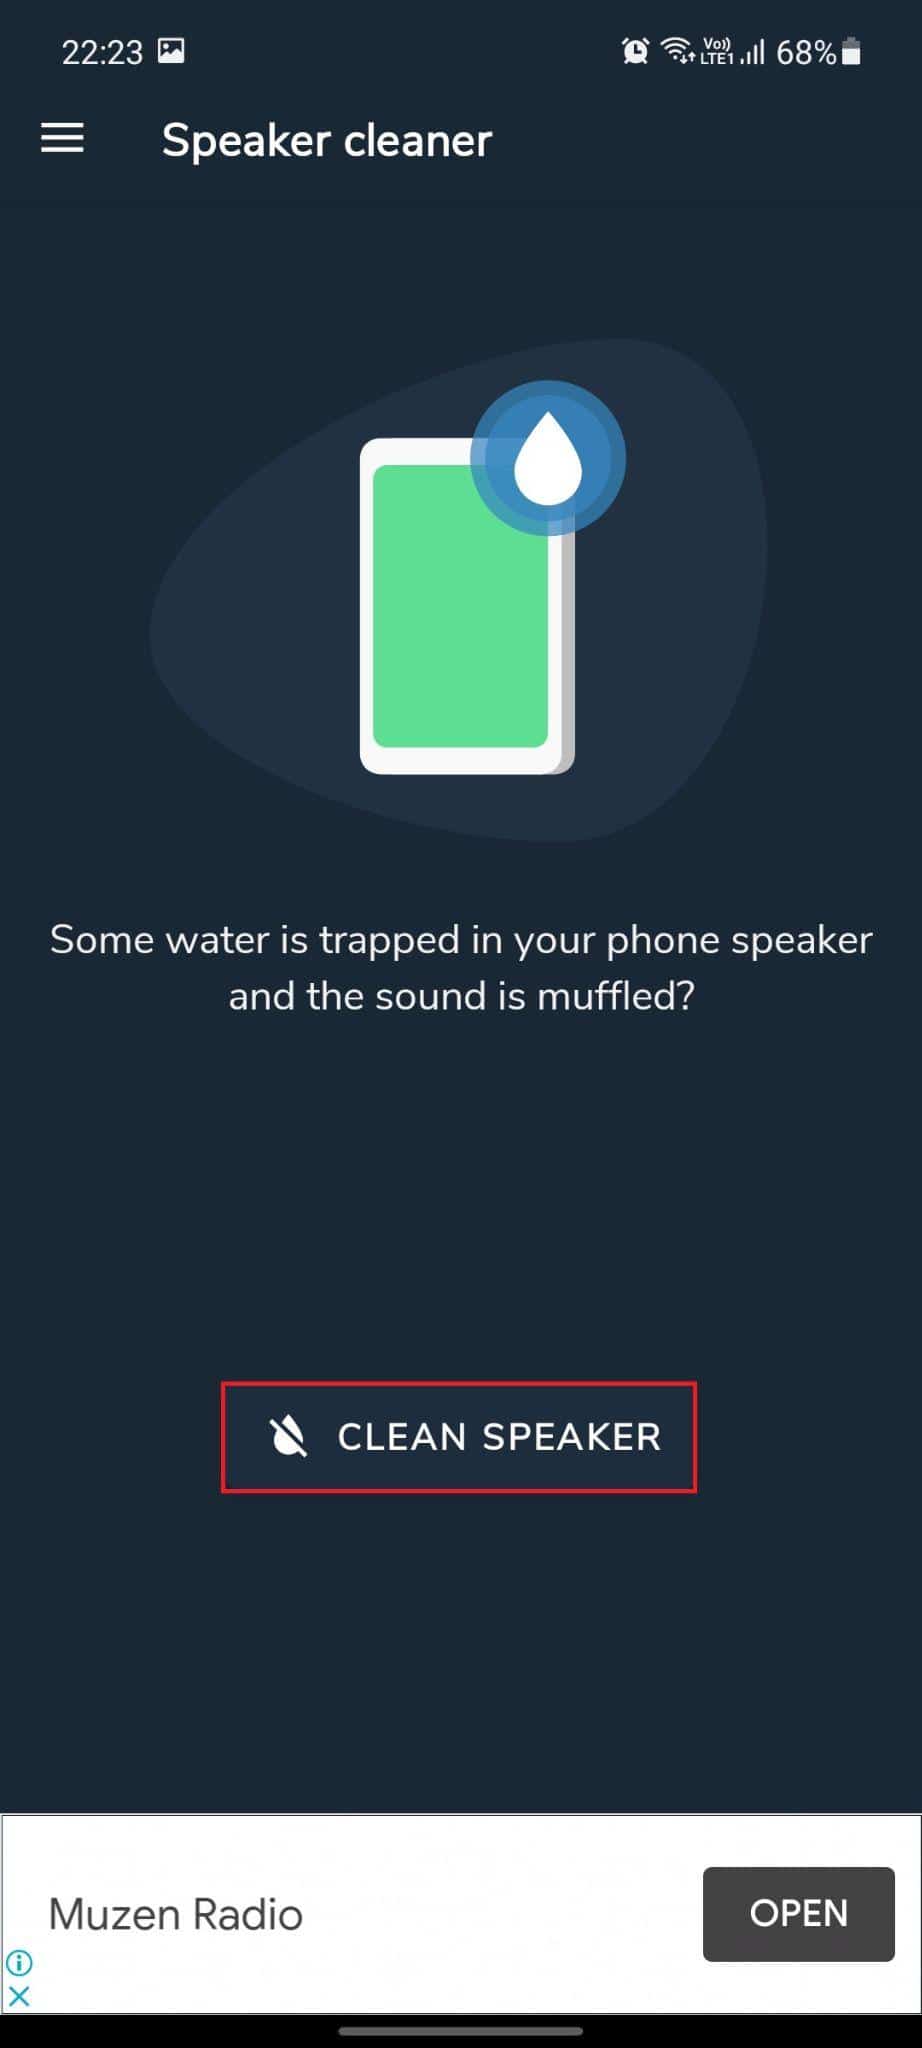 Speaker Cleaner - Remove water & fix sound app. Clean Speaker option is highlighted. How to Fix Phone Speaker Water Damage